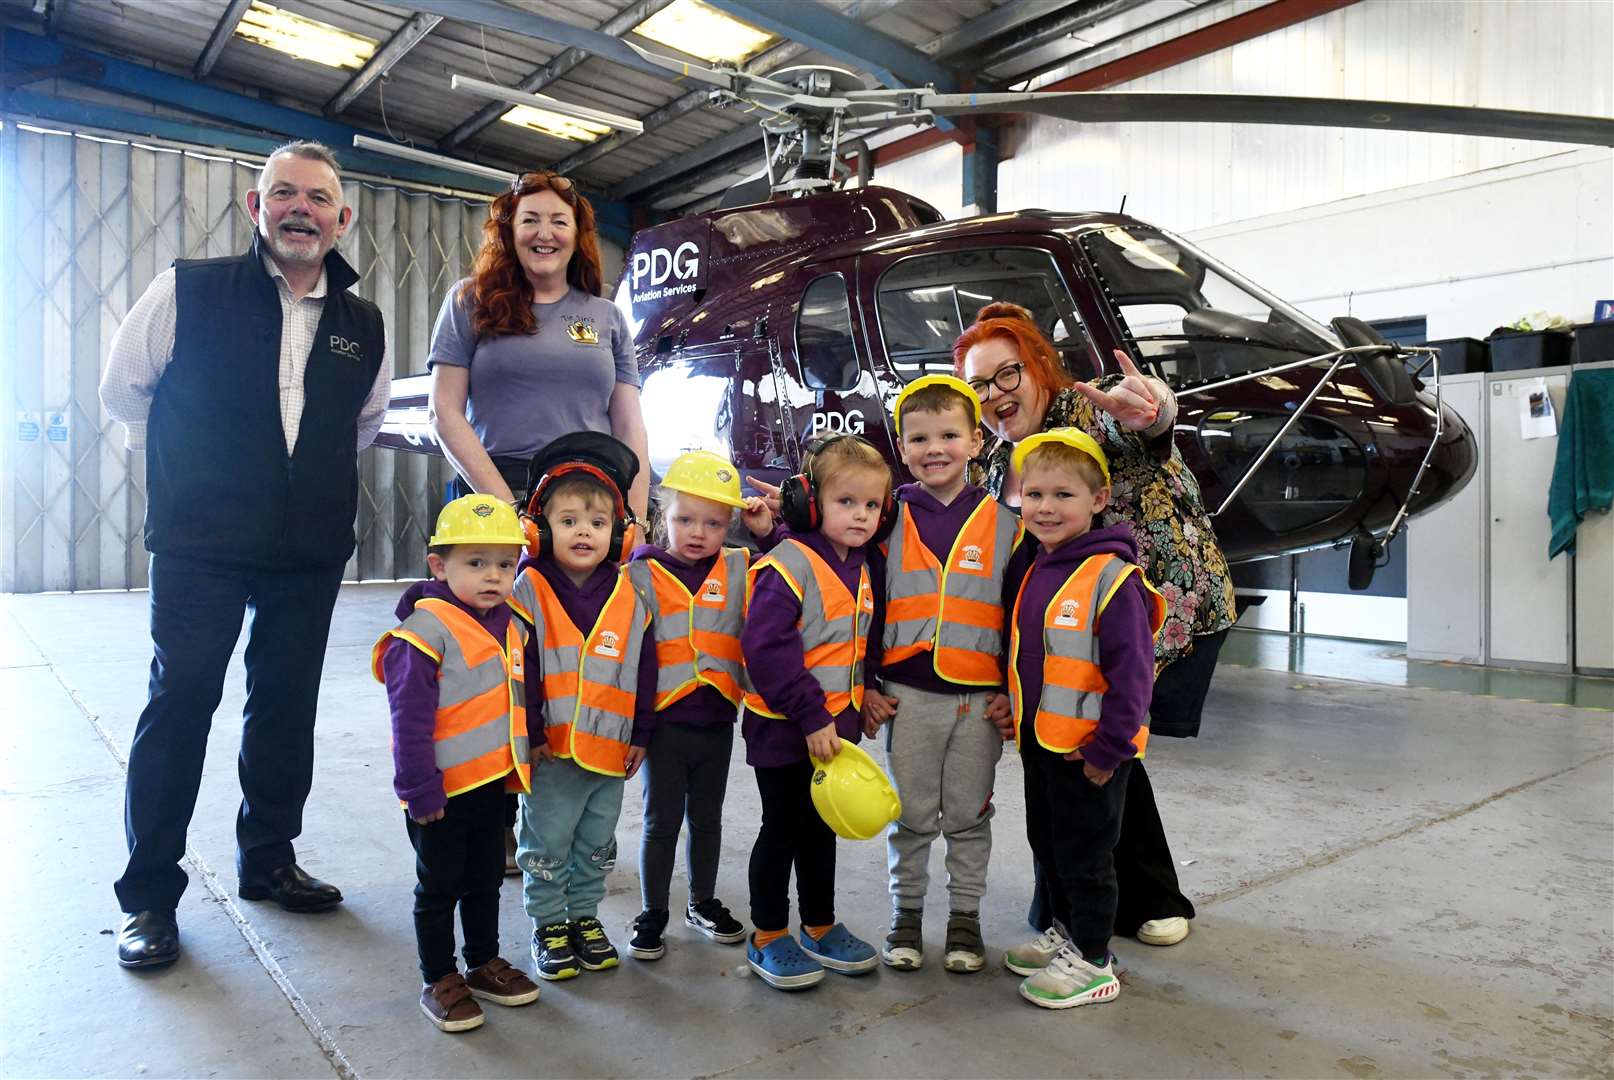 Shaun Strain, CEO of PDG Aviation Services, Tina Strain, Owner of Tintins Early Learning & Childcare and Marion Irvine, Assistant Manager with Tommy Barnett, Brodie Connell, Arla Fraser, Ozzy Clark, Brodie Mackay and Jackson Lee. Picture: James Mackenzie.